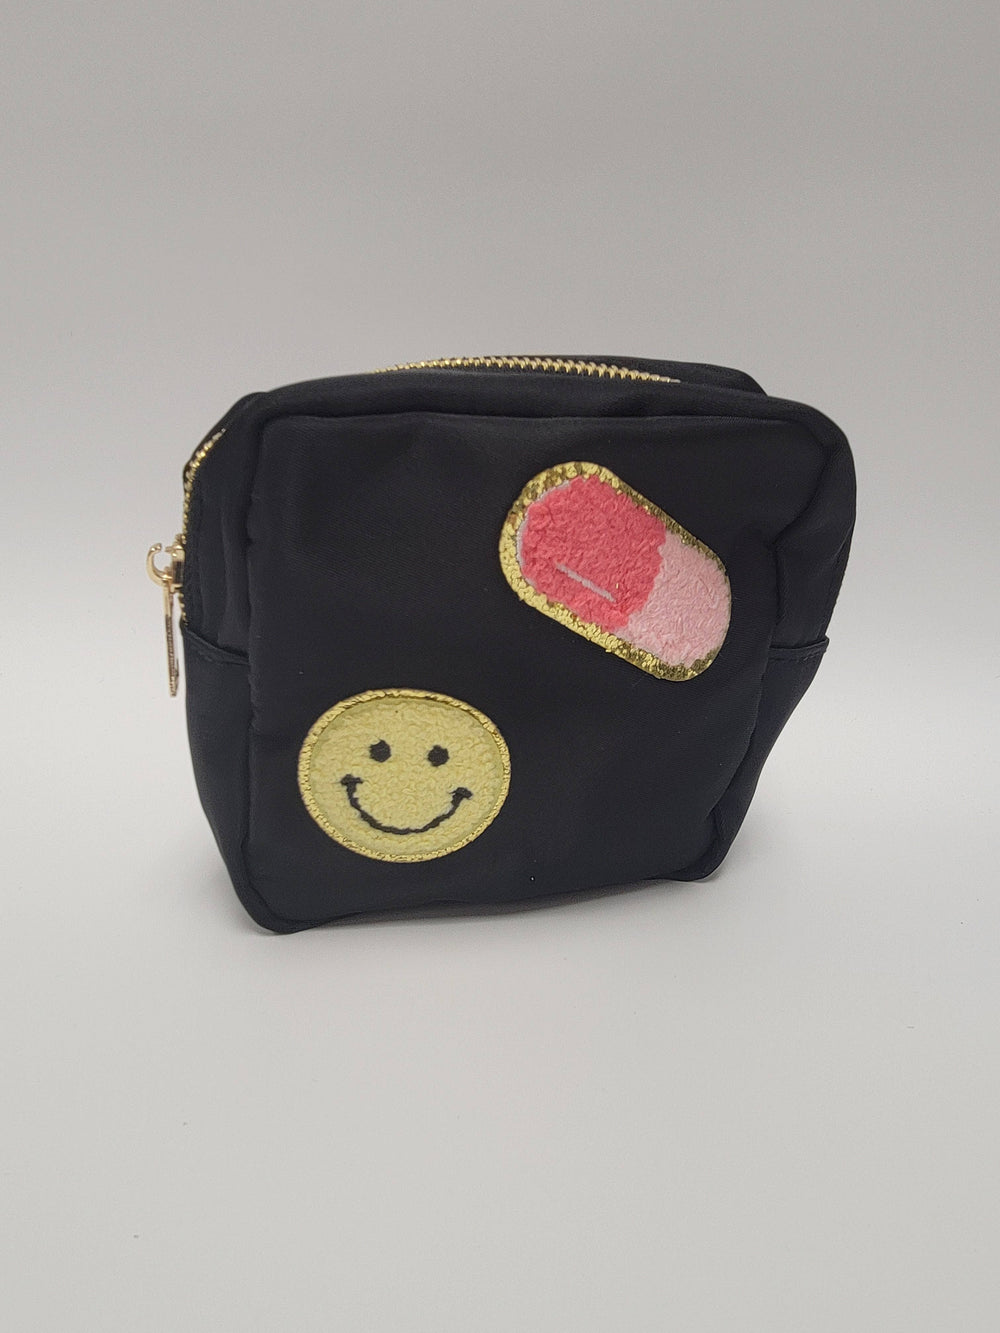 Smiley & Pill Black Pouch w/ Chenille Patches